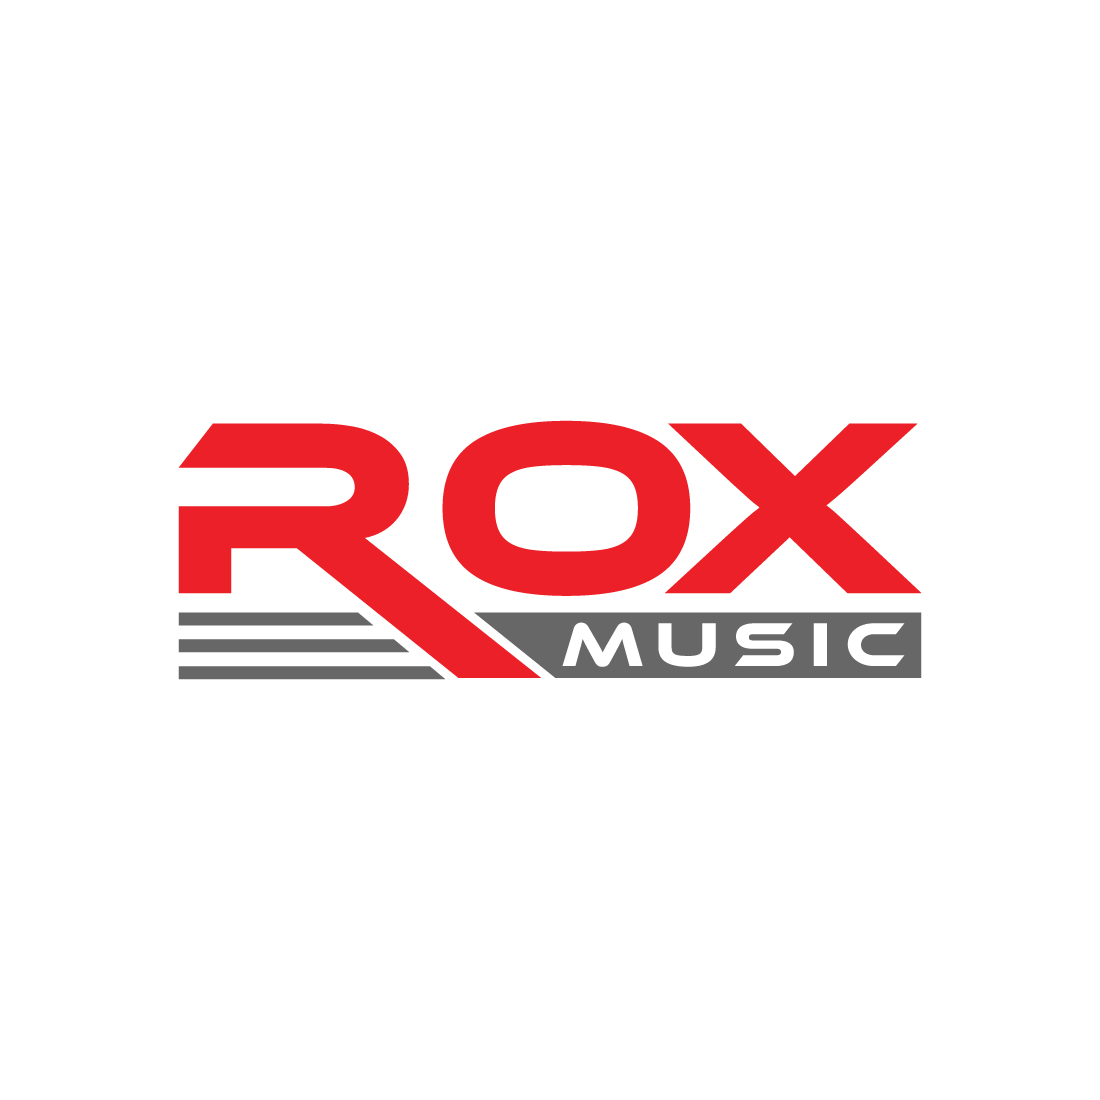 Rox Music preview image.